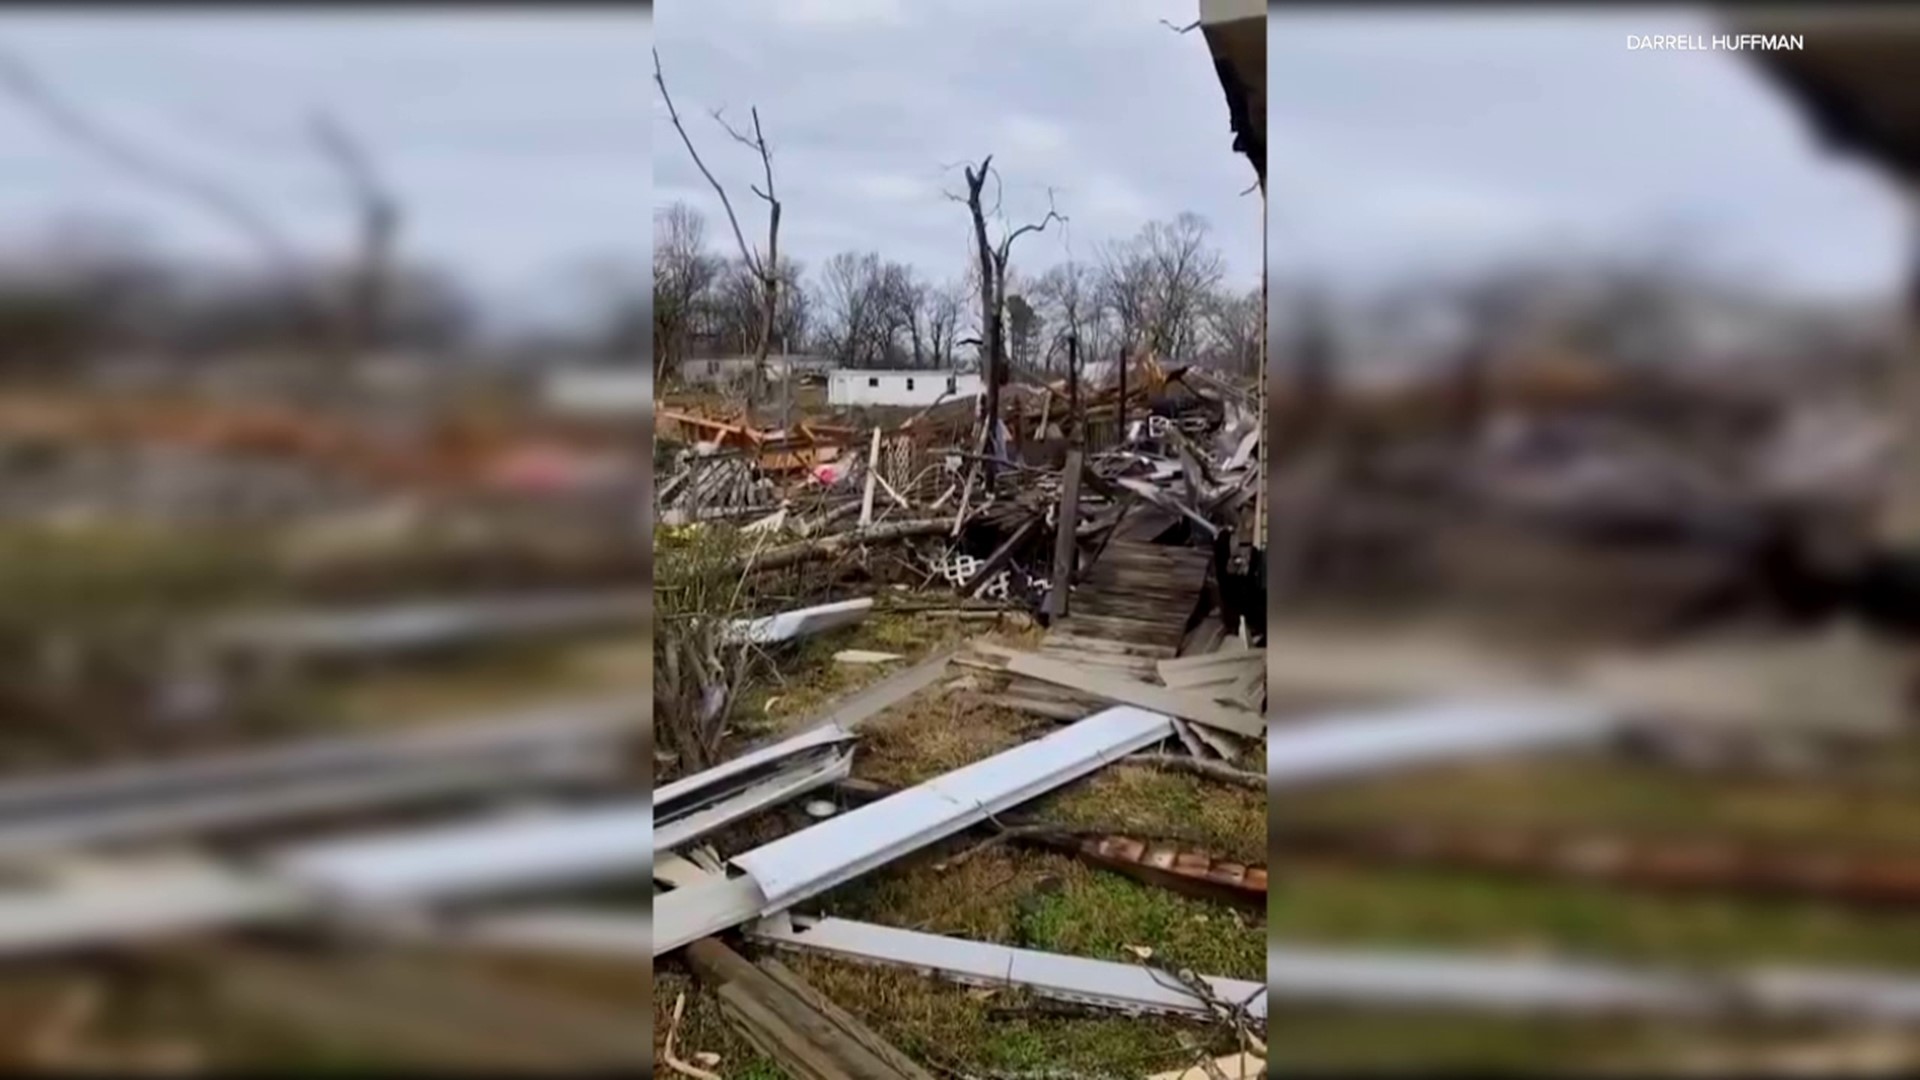 For a Wyoming County native, a tornado took away not only their home but their livelihoods.